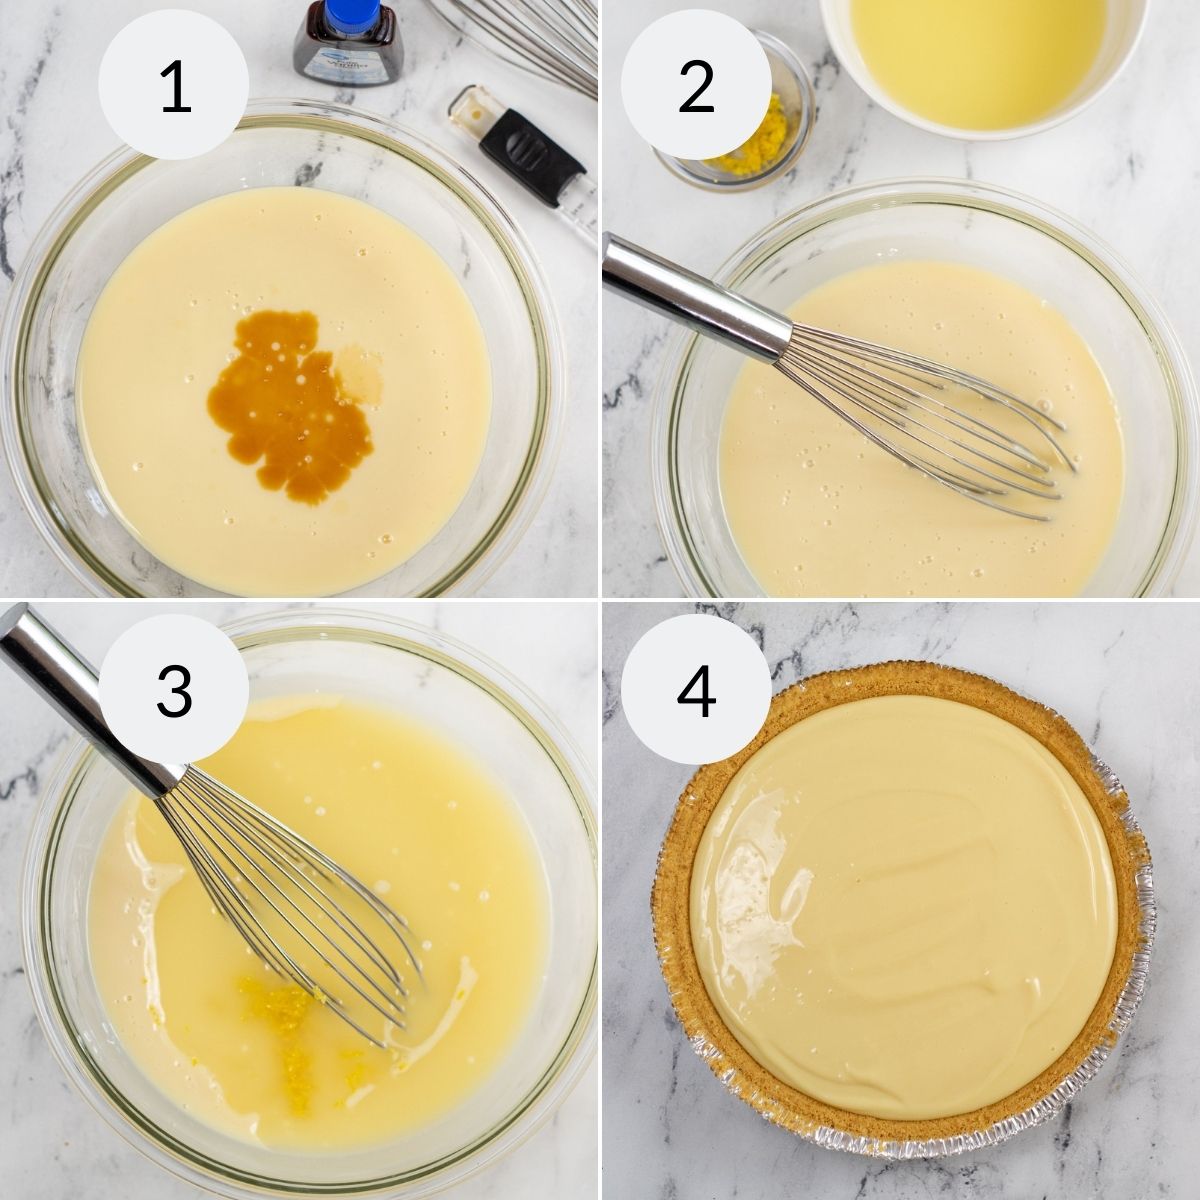 Mixing the filling and placing it in the prepared pie crust.